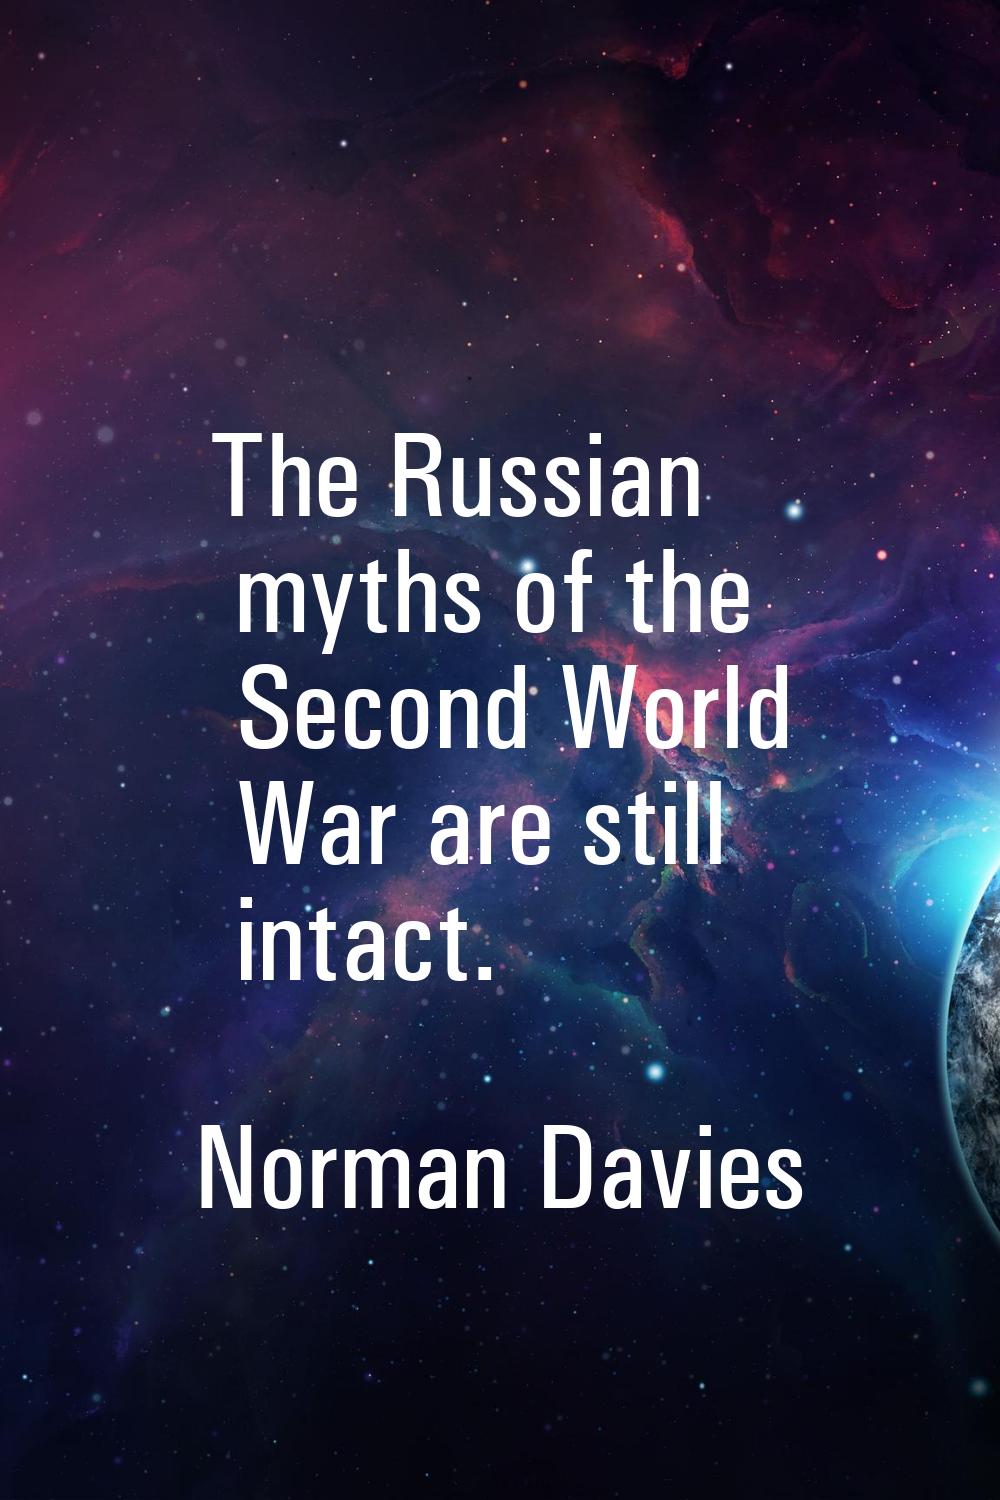 The Russian myths of the Second World War are still intact.